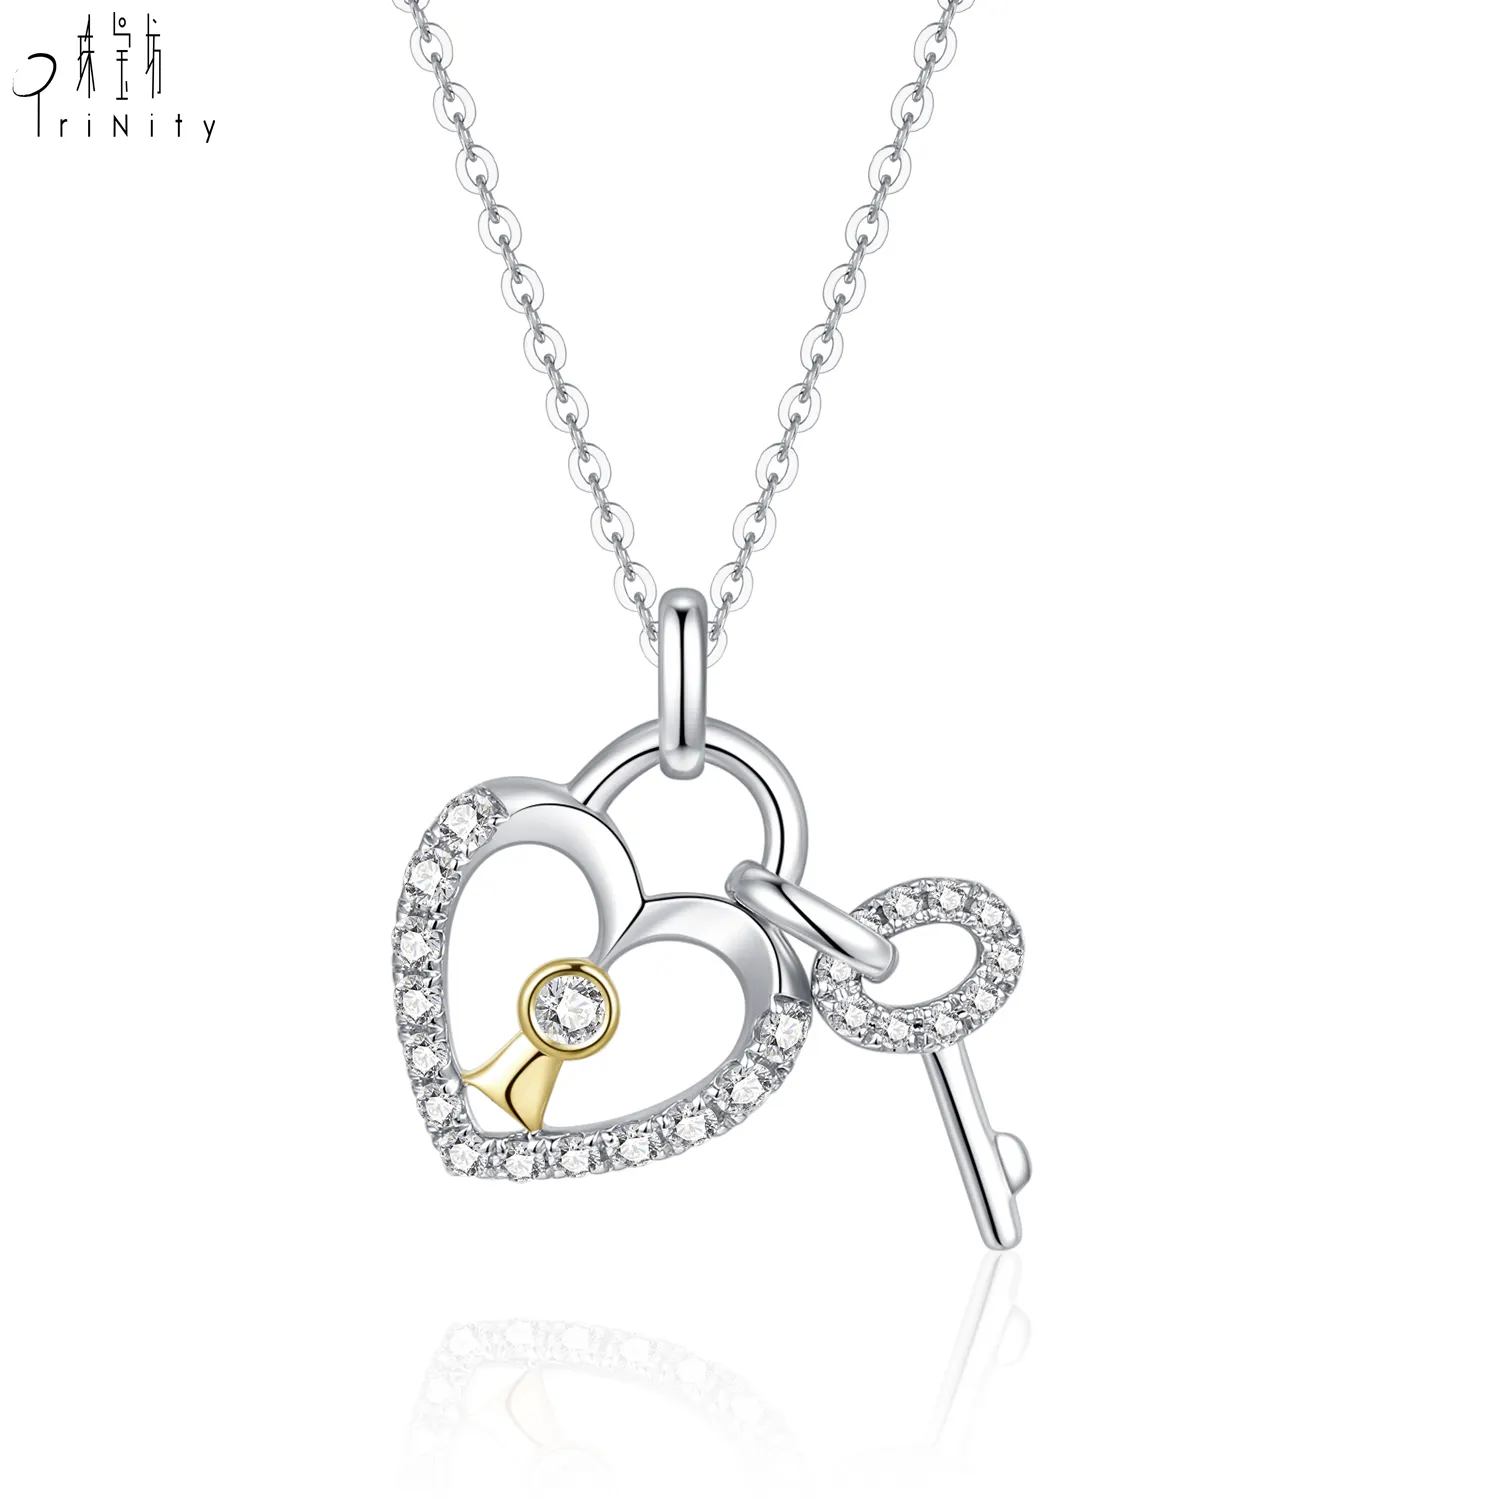 Lock Pendant Necklace New Arrival Elegant Jewelry 18K Solid White Gold Natural Diamond Heart Lock Key Pendant Necklace For Girls